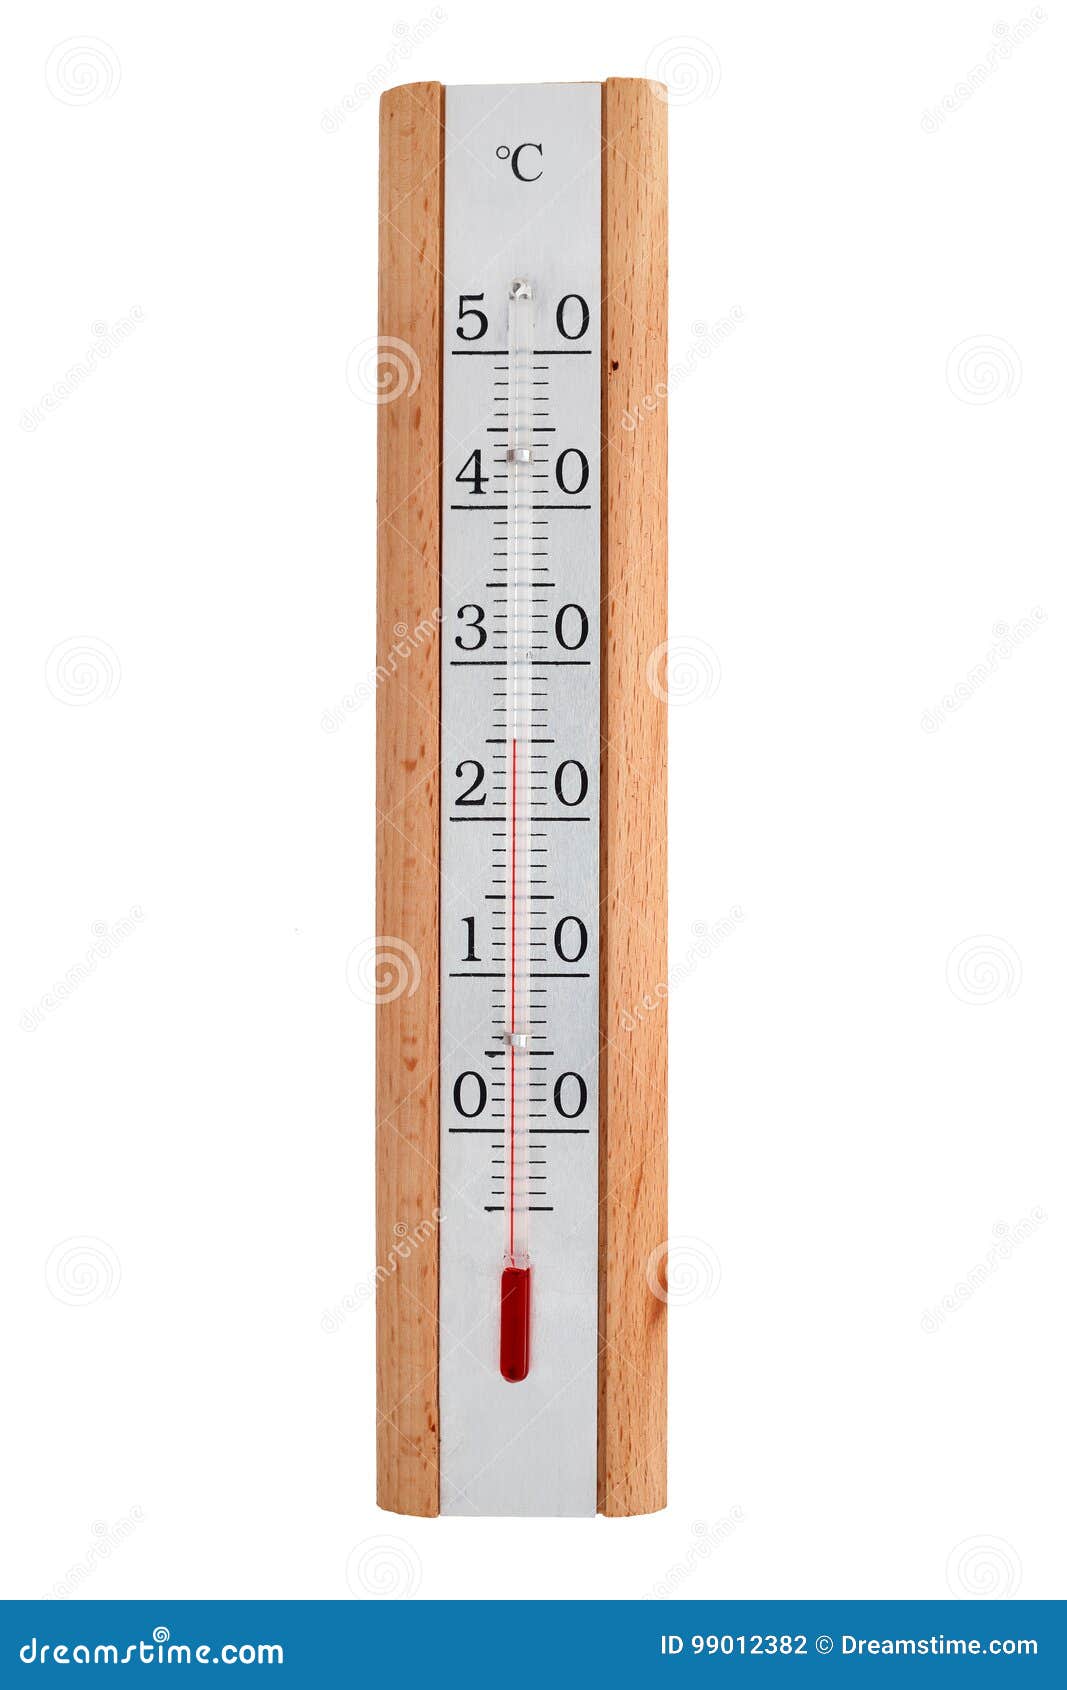 The Room Thermometer On A Metal Plate In A Wooden Frame